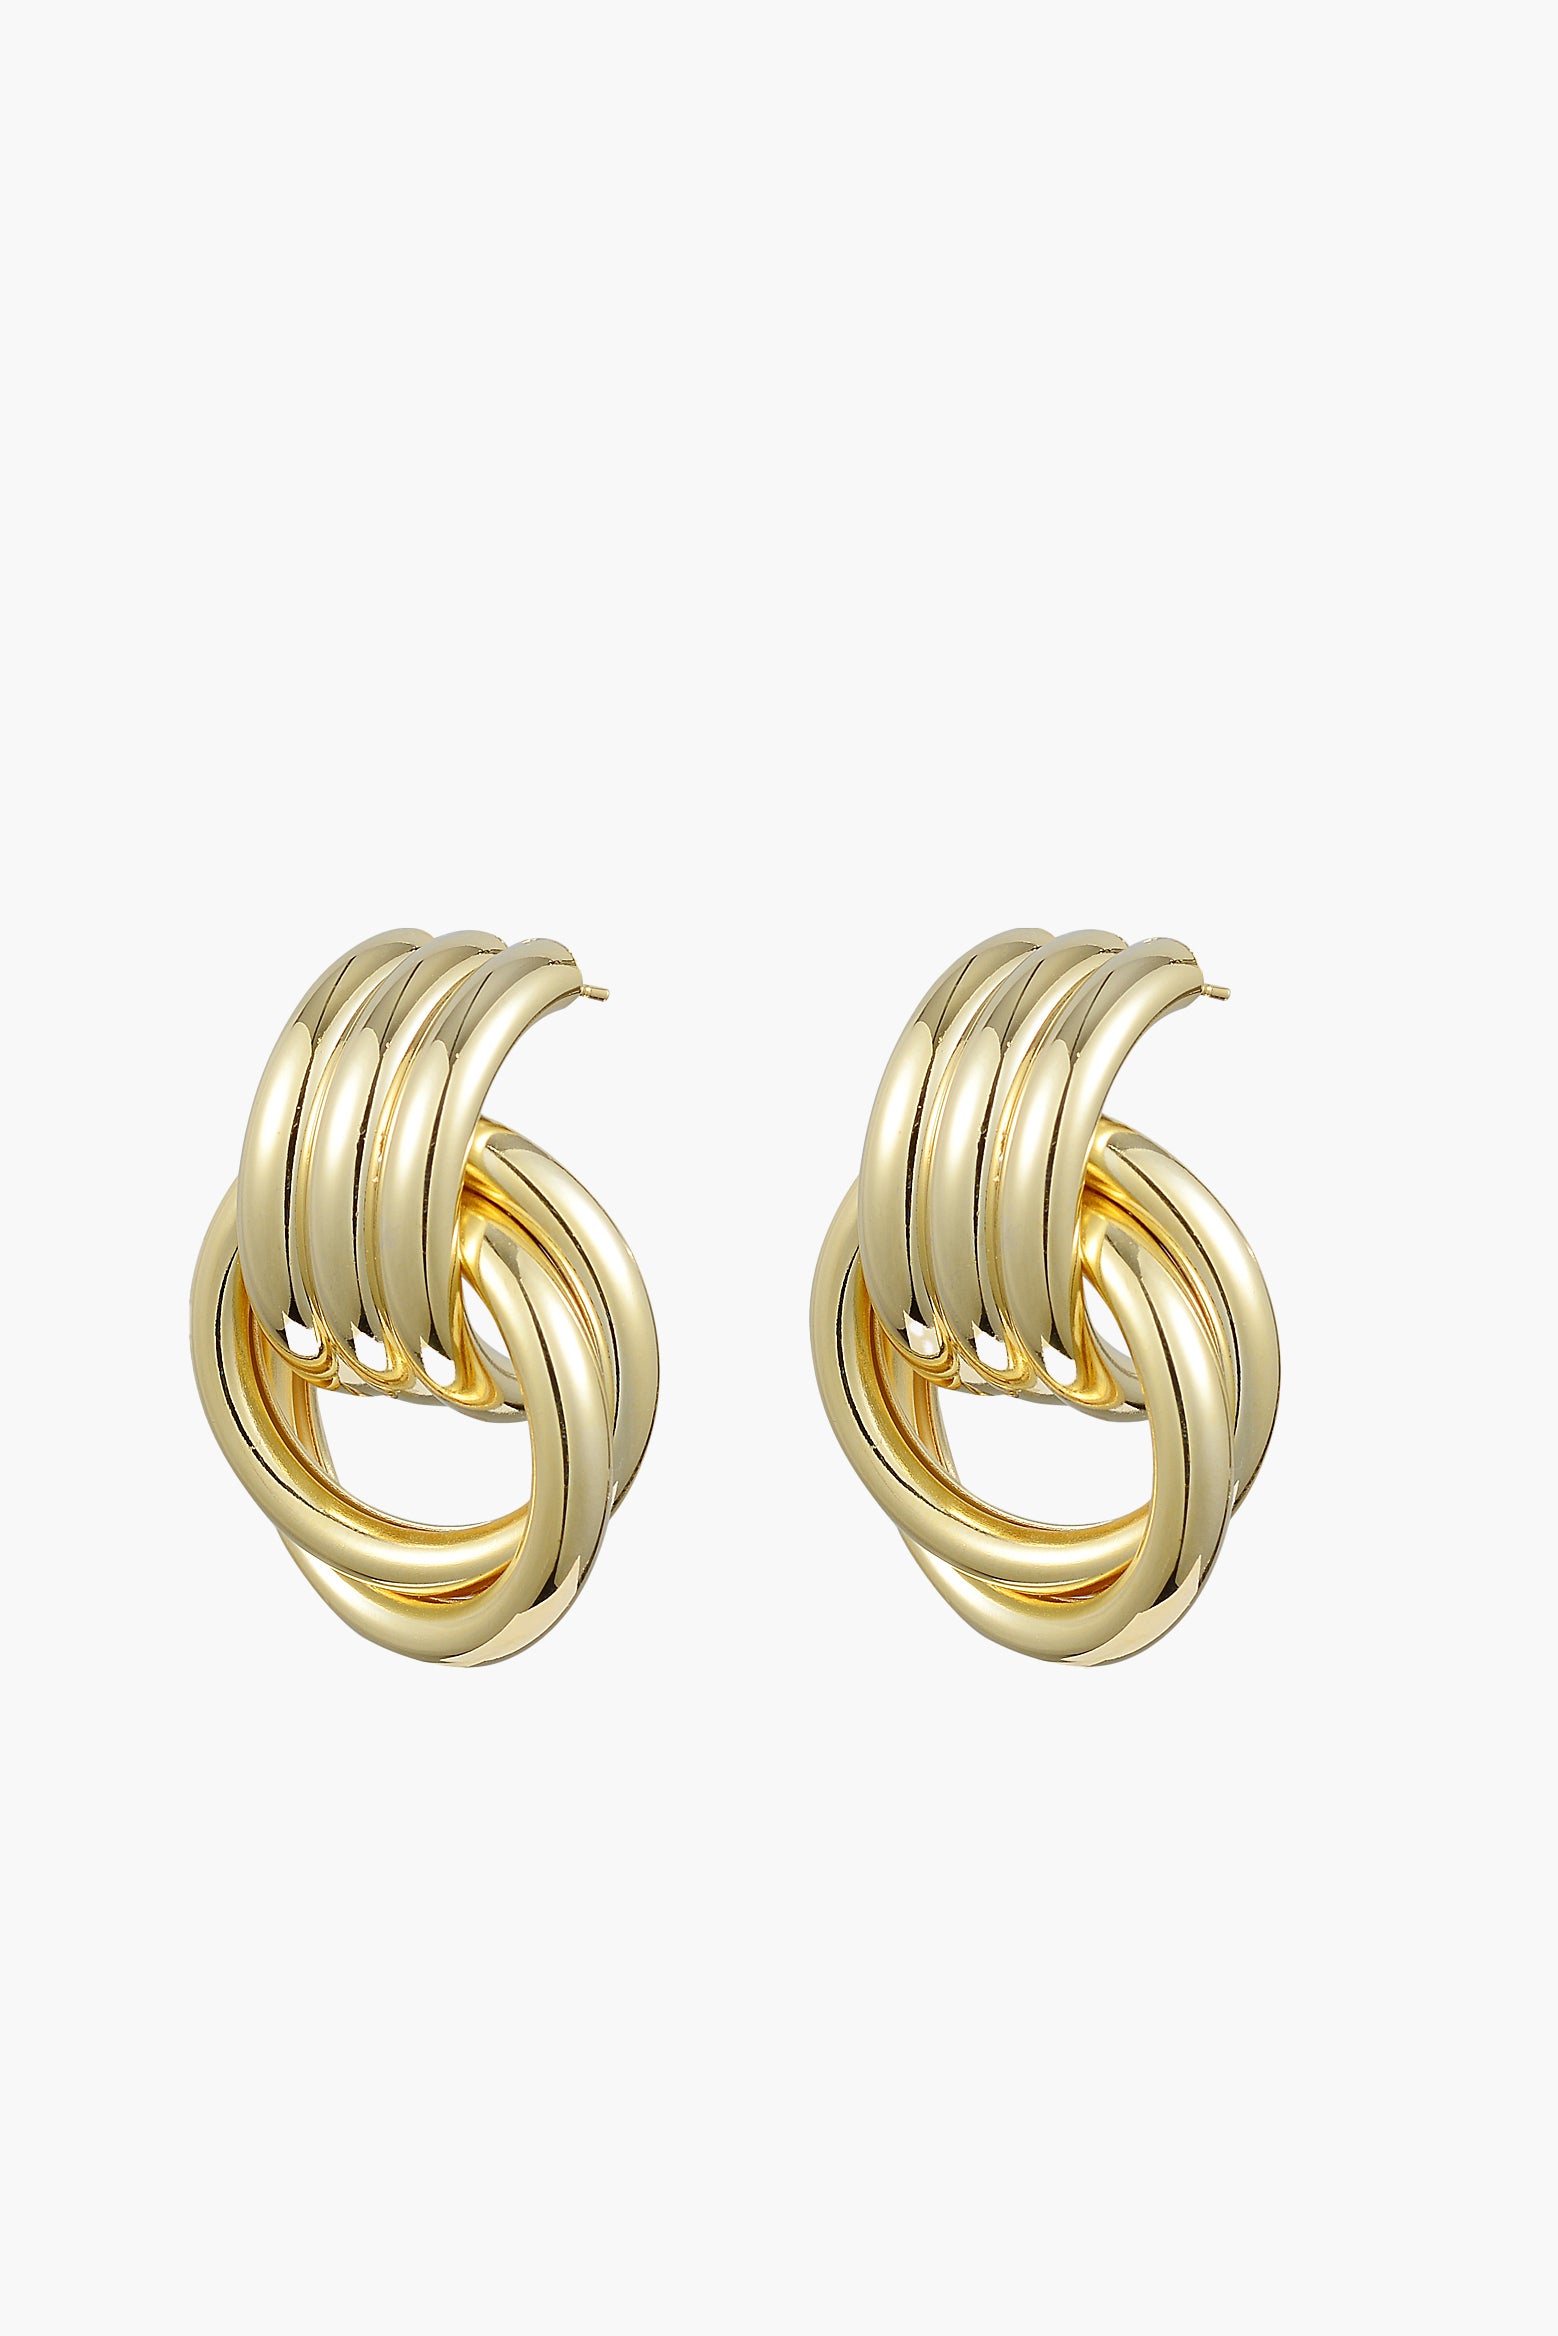 Anna Rossi Revival Earring in Gold available at The New Trend.